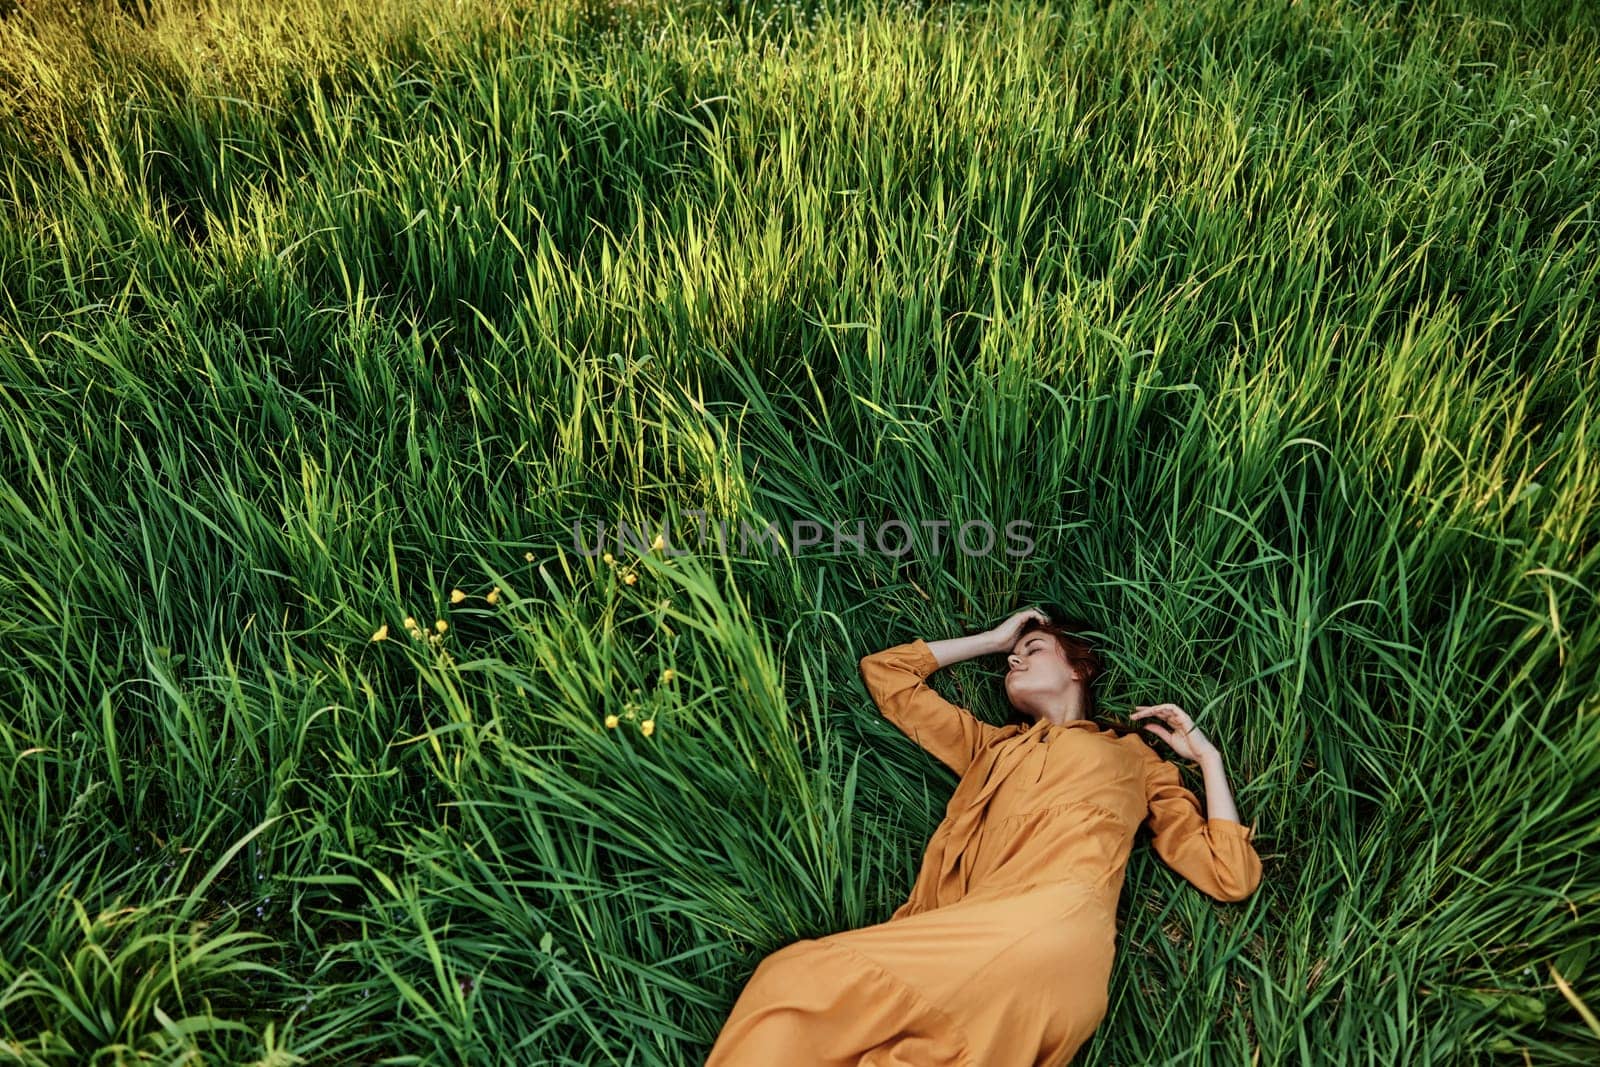 a sweet, calm woman in an orange dress lies in a green field with her hands under her head enjoying silence and peace. Horizontal photo taken from above by Vichizh